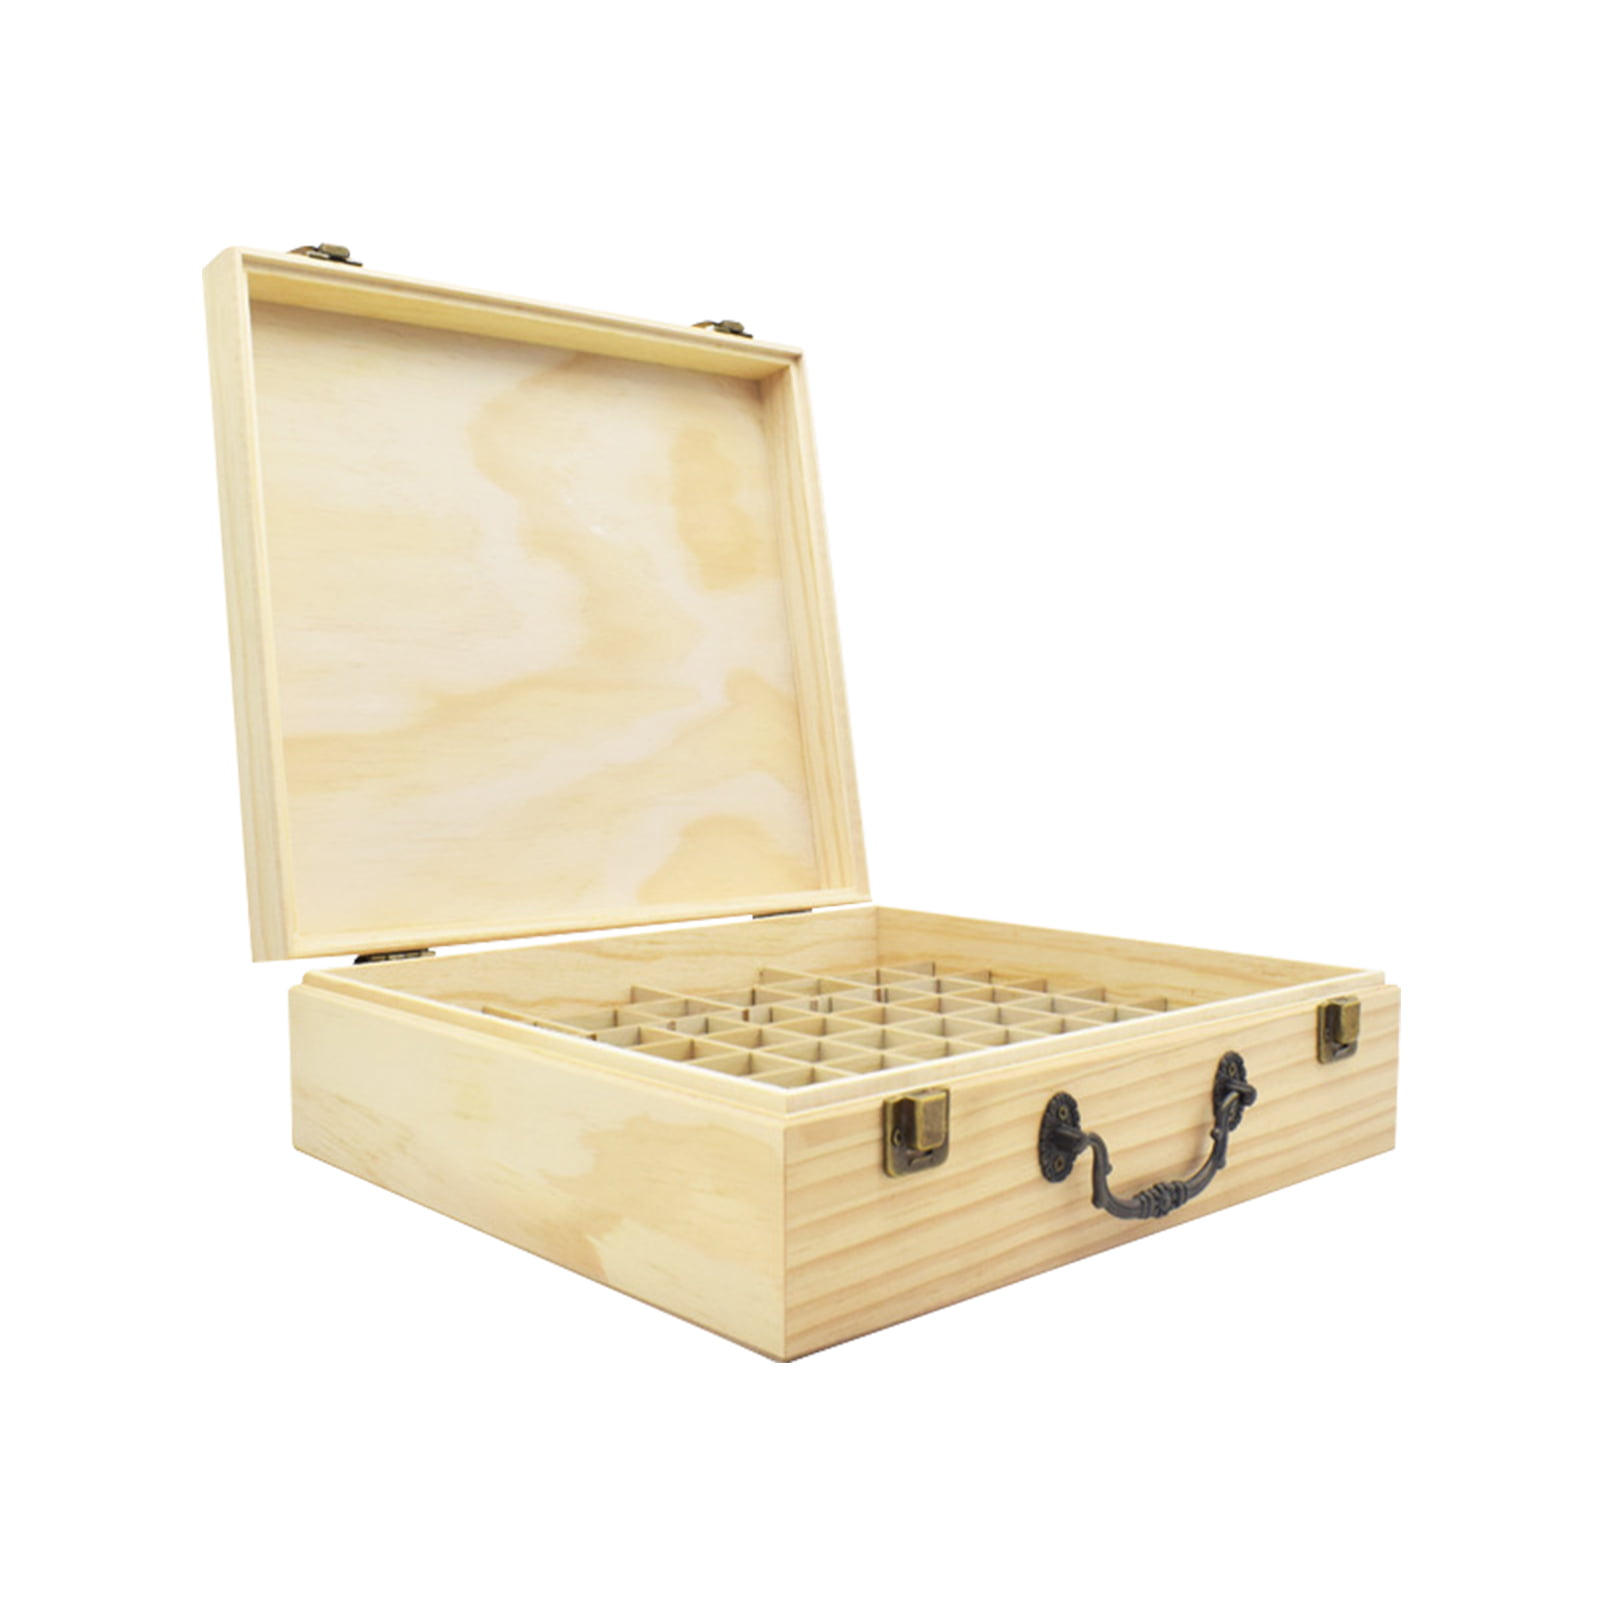 Details about   Large Wooden Box with No Handles Storage Chest DIY Furniture Lid Wood Boxes 